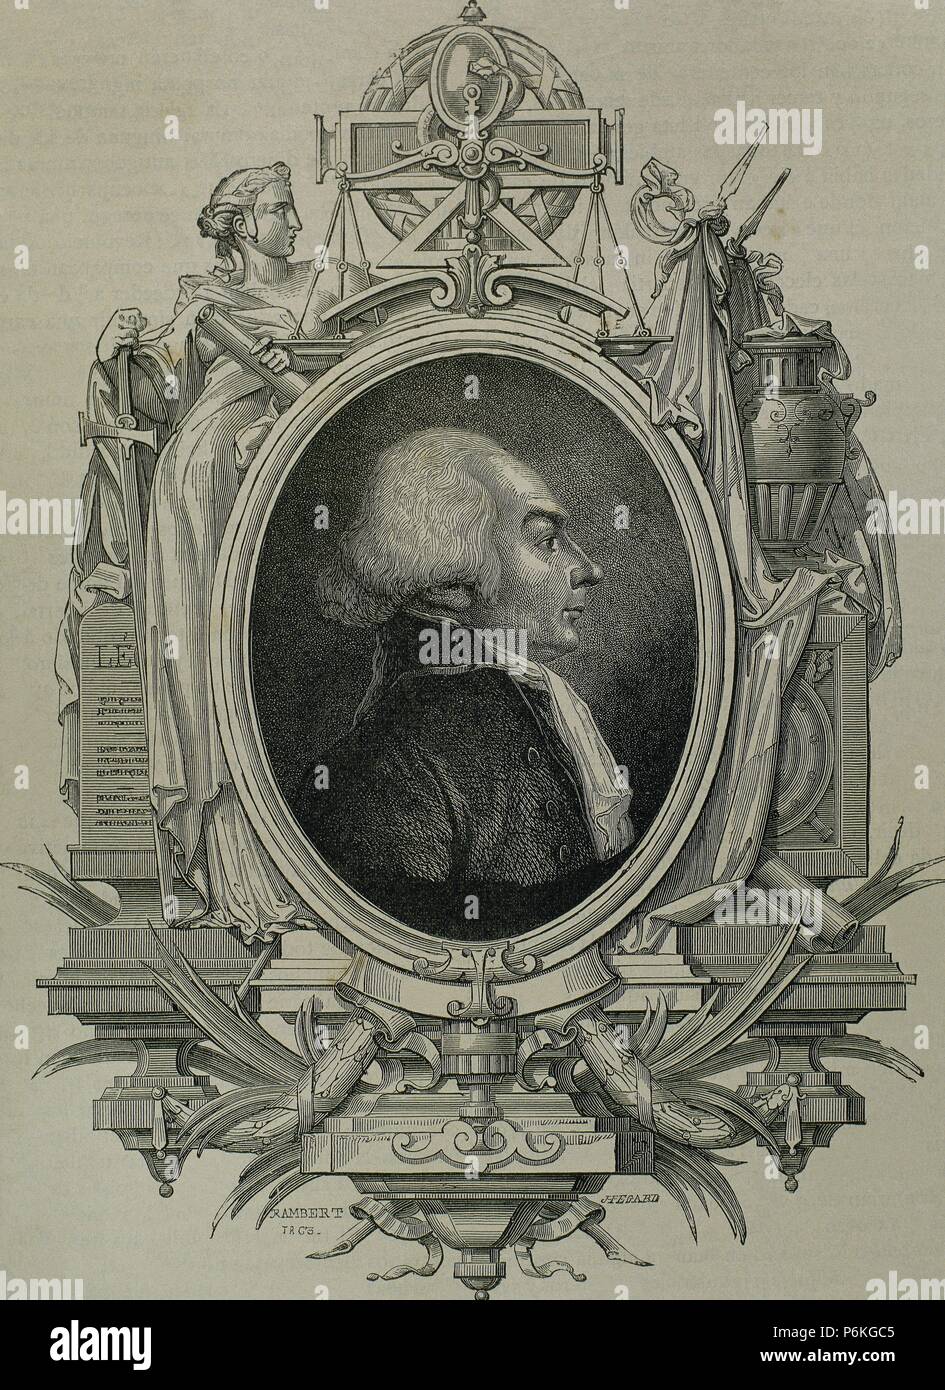 Jerome Petion de Villeneuve (1756-1794). French writr and politician who served as the 2nd Mayor of Paris. Engraving. Portrait. 19th century. Stock Photo